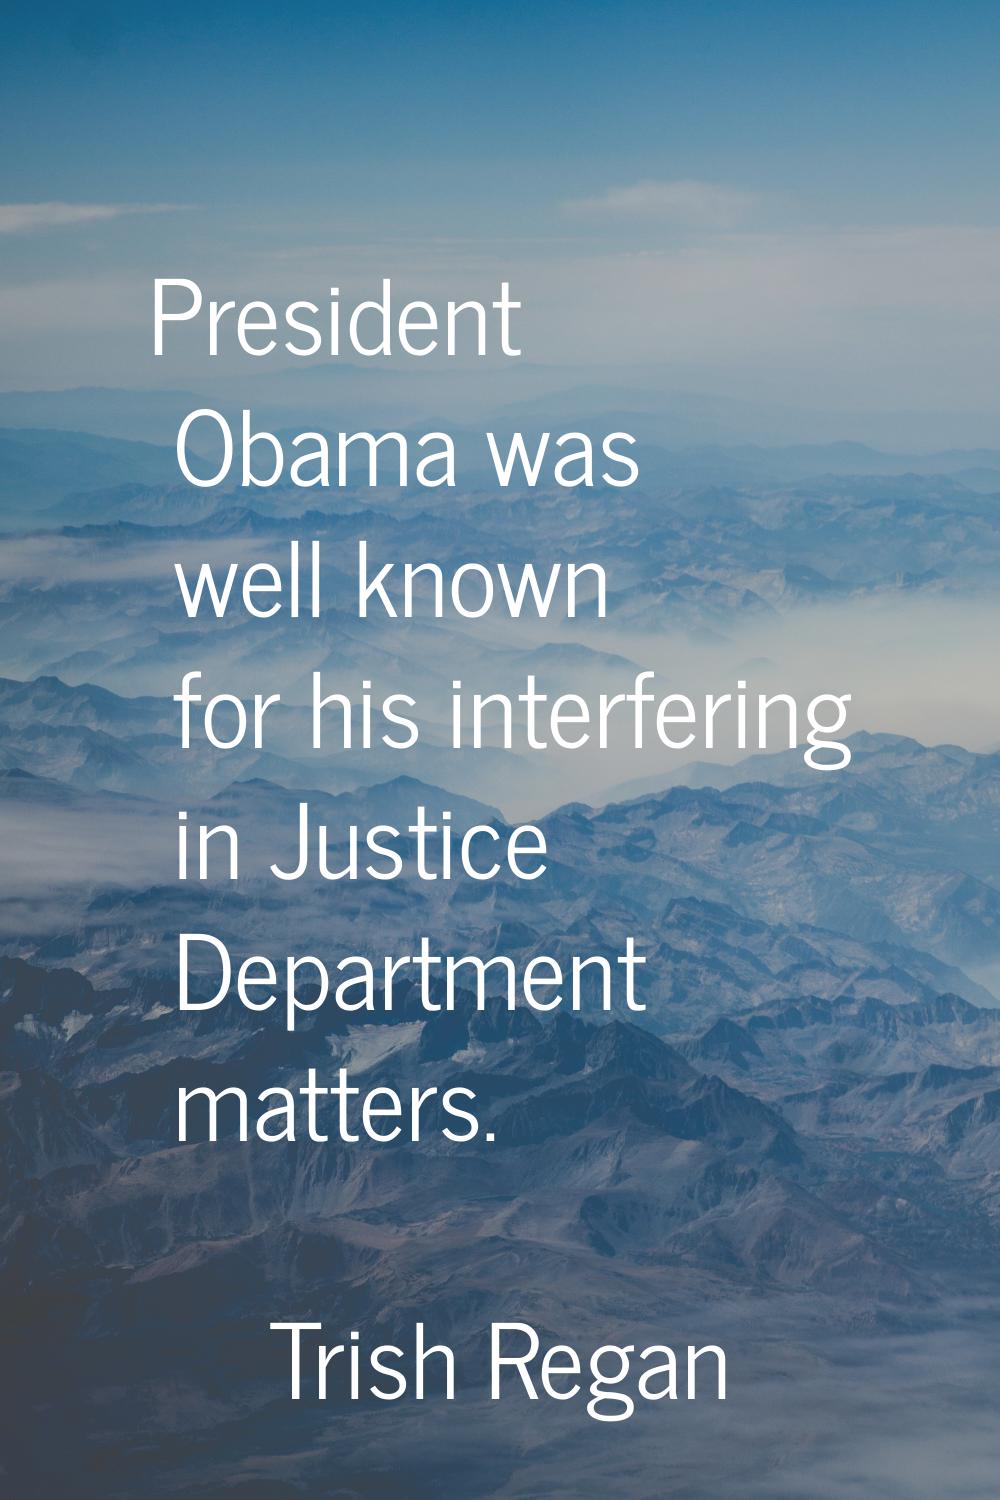 President Obama was well known for his interfering in Justice Department matters.